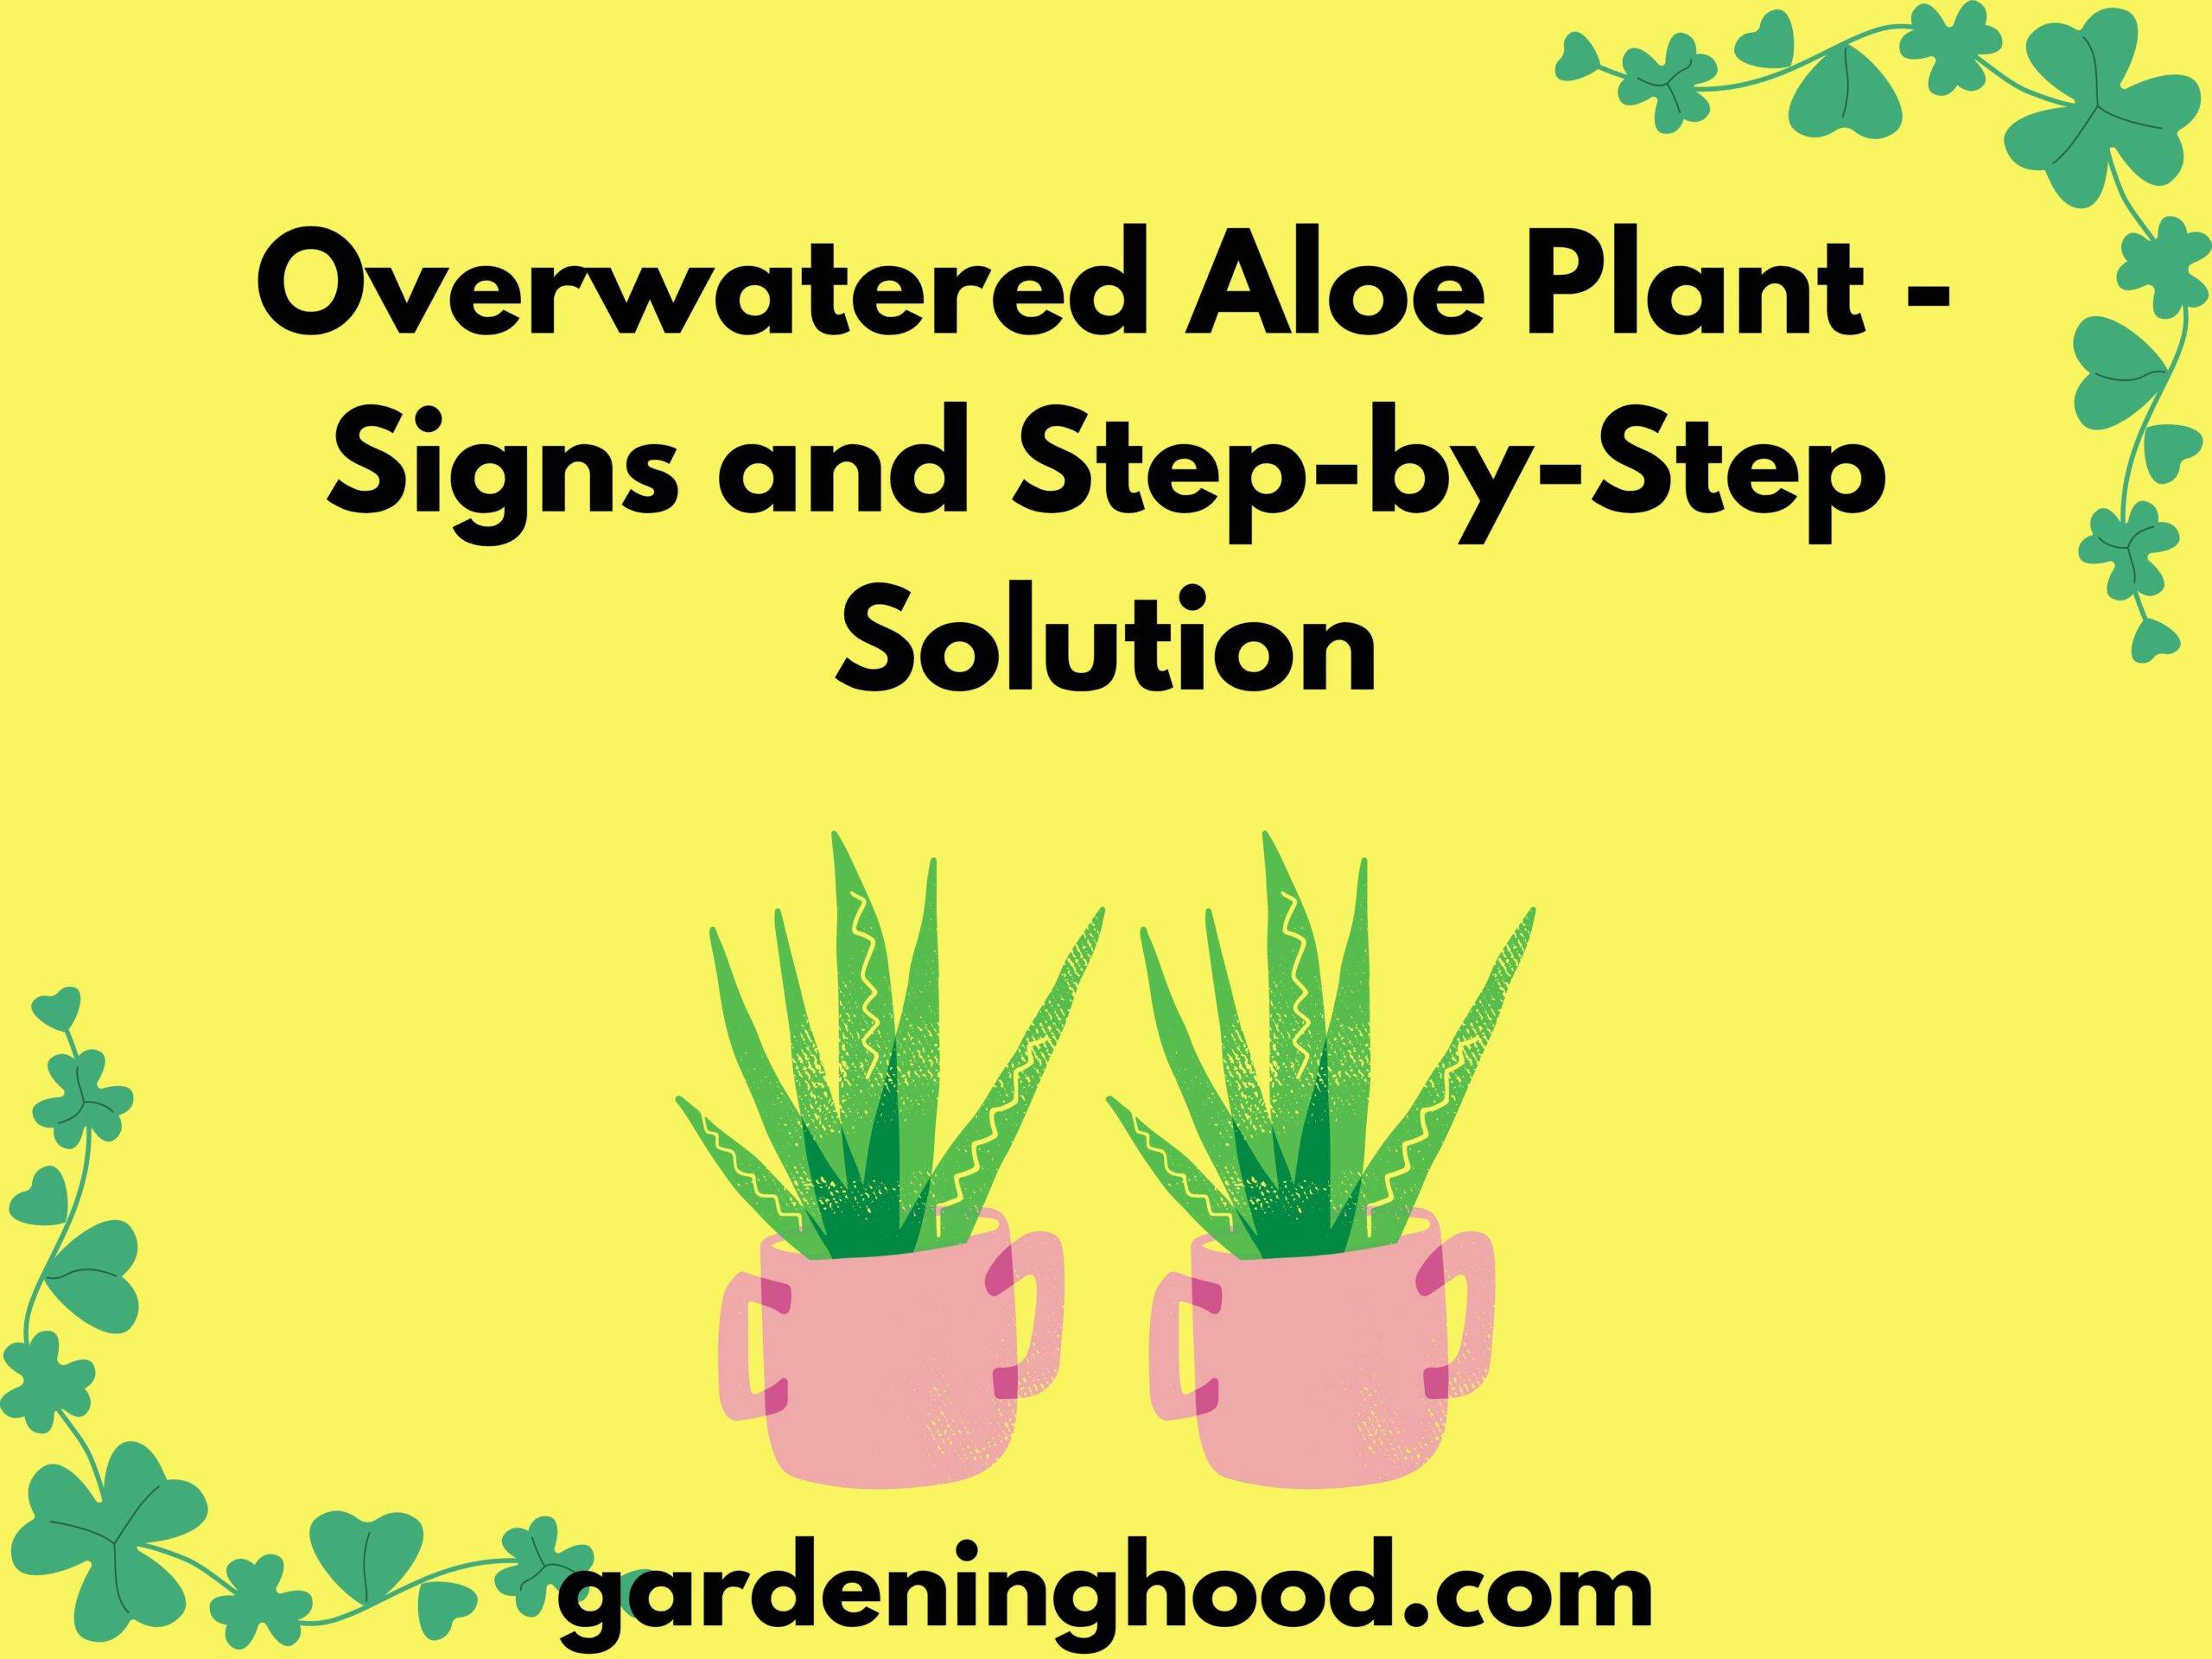 Overwatered Aloe Plant - Signs and Step-by-Step Solution